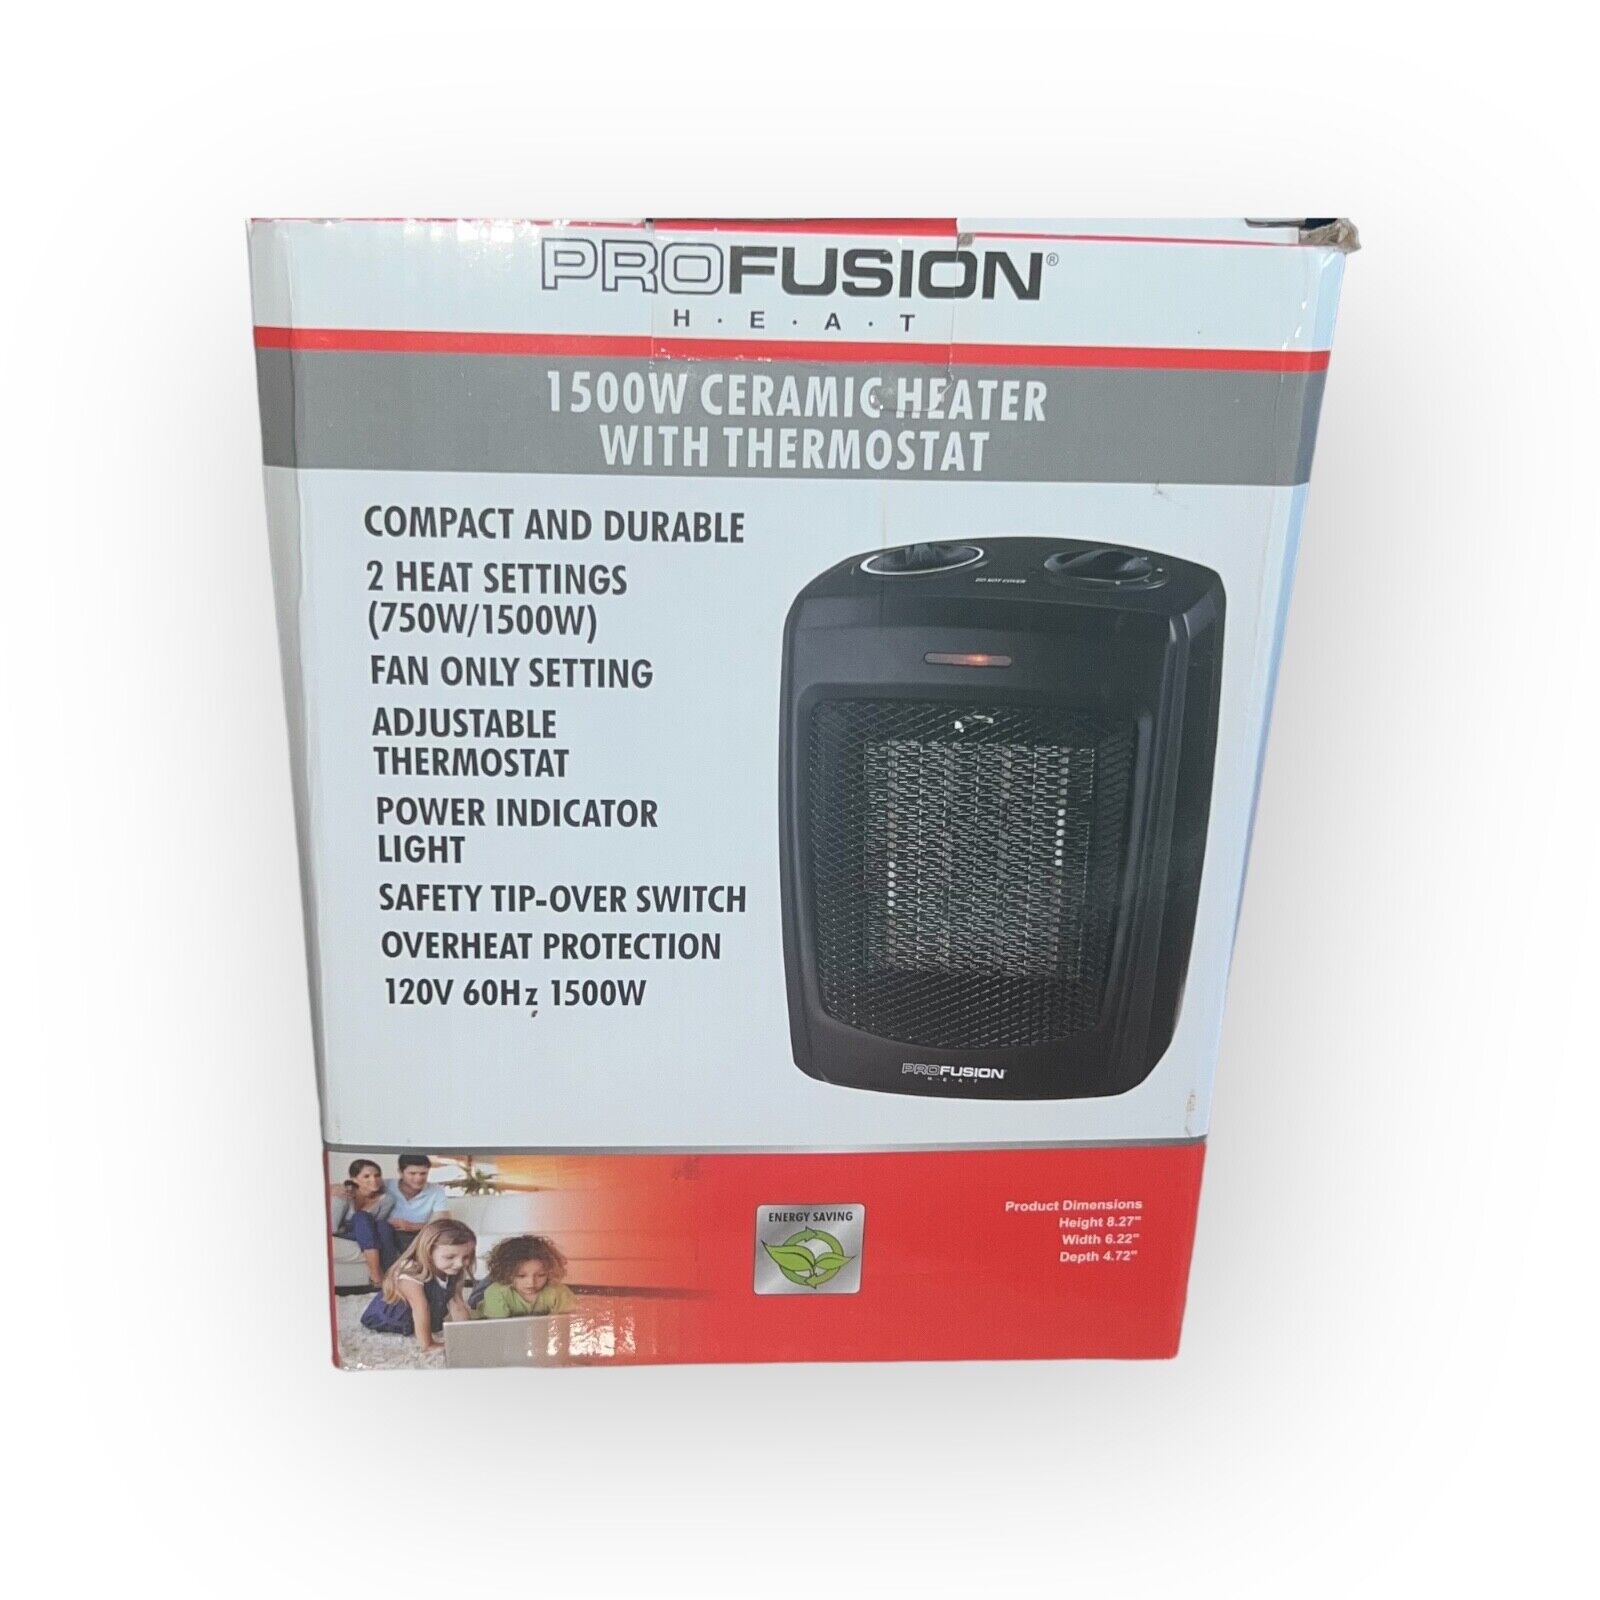 ProFusion Heat 1500W Personal Ceramic Heater with Thermostat Portable & Durable